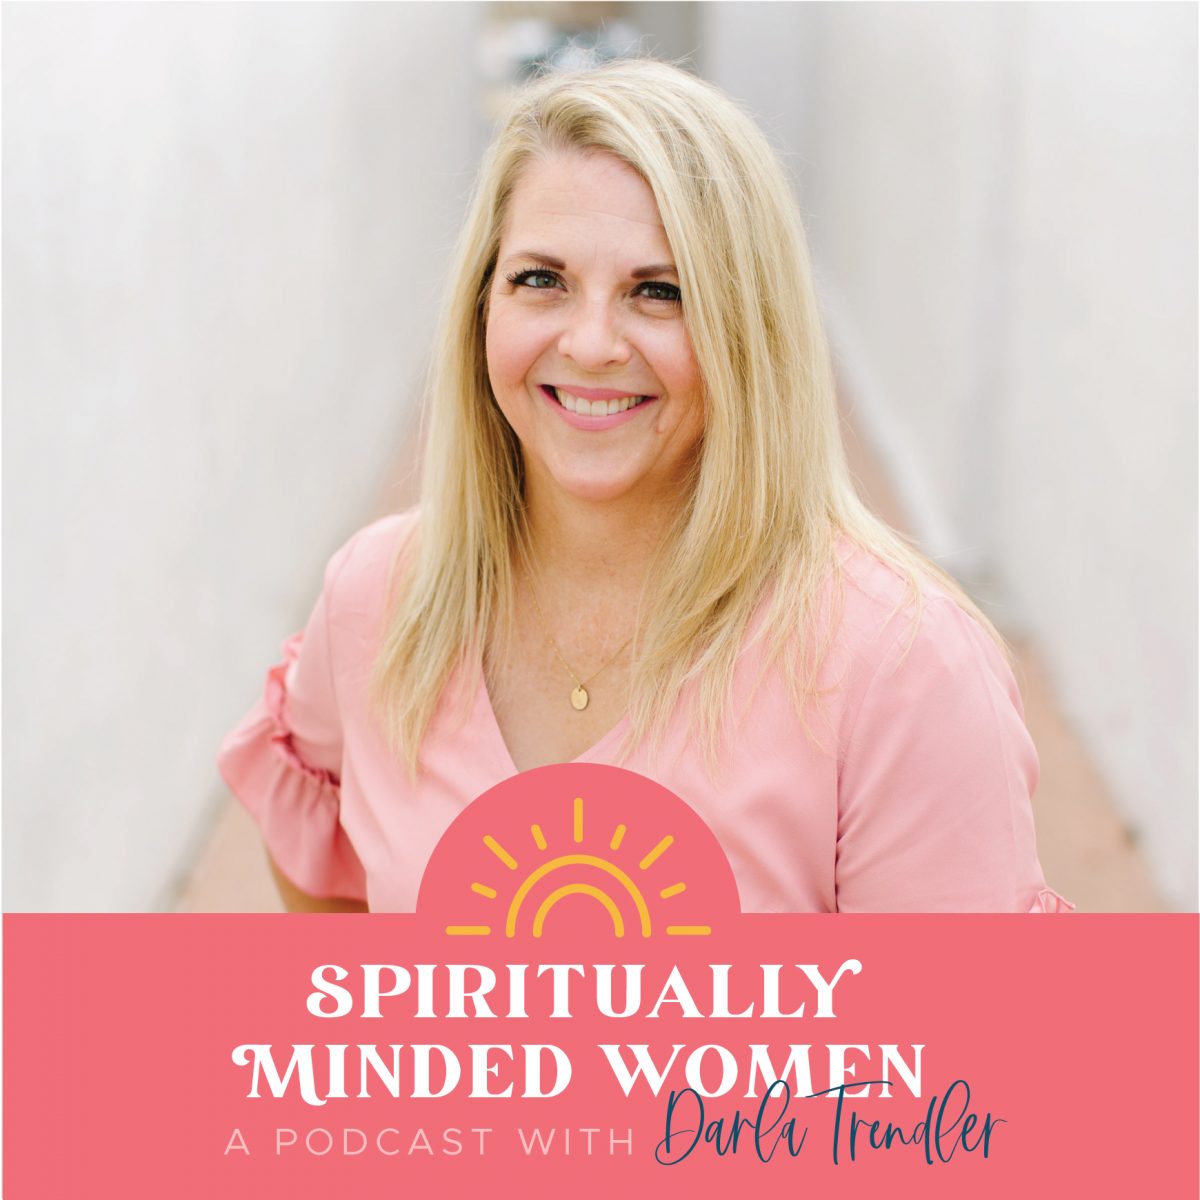 Join me on Spiritually Minded Women